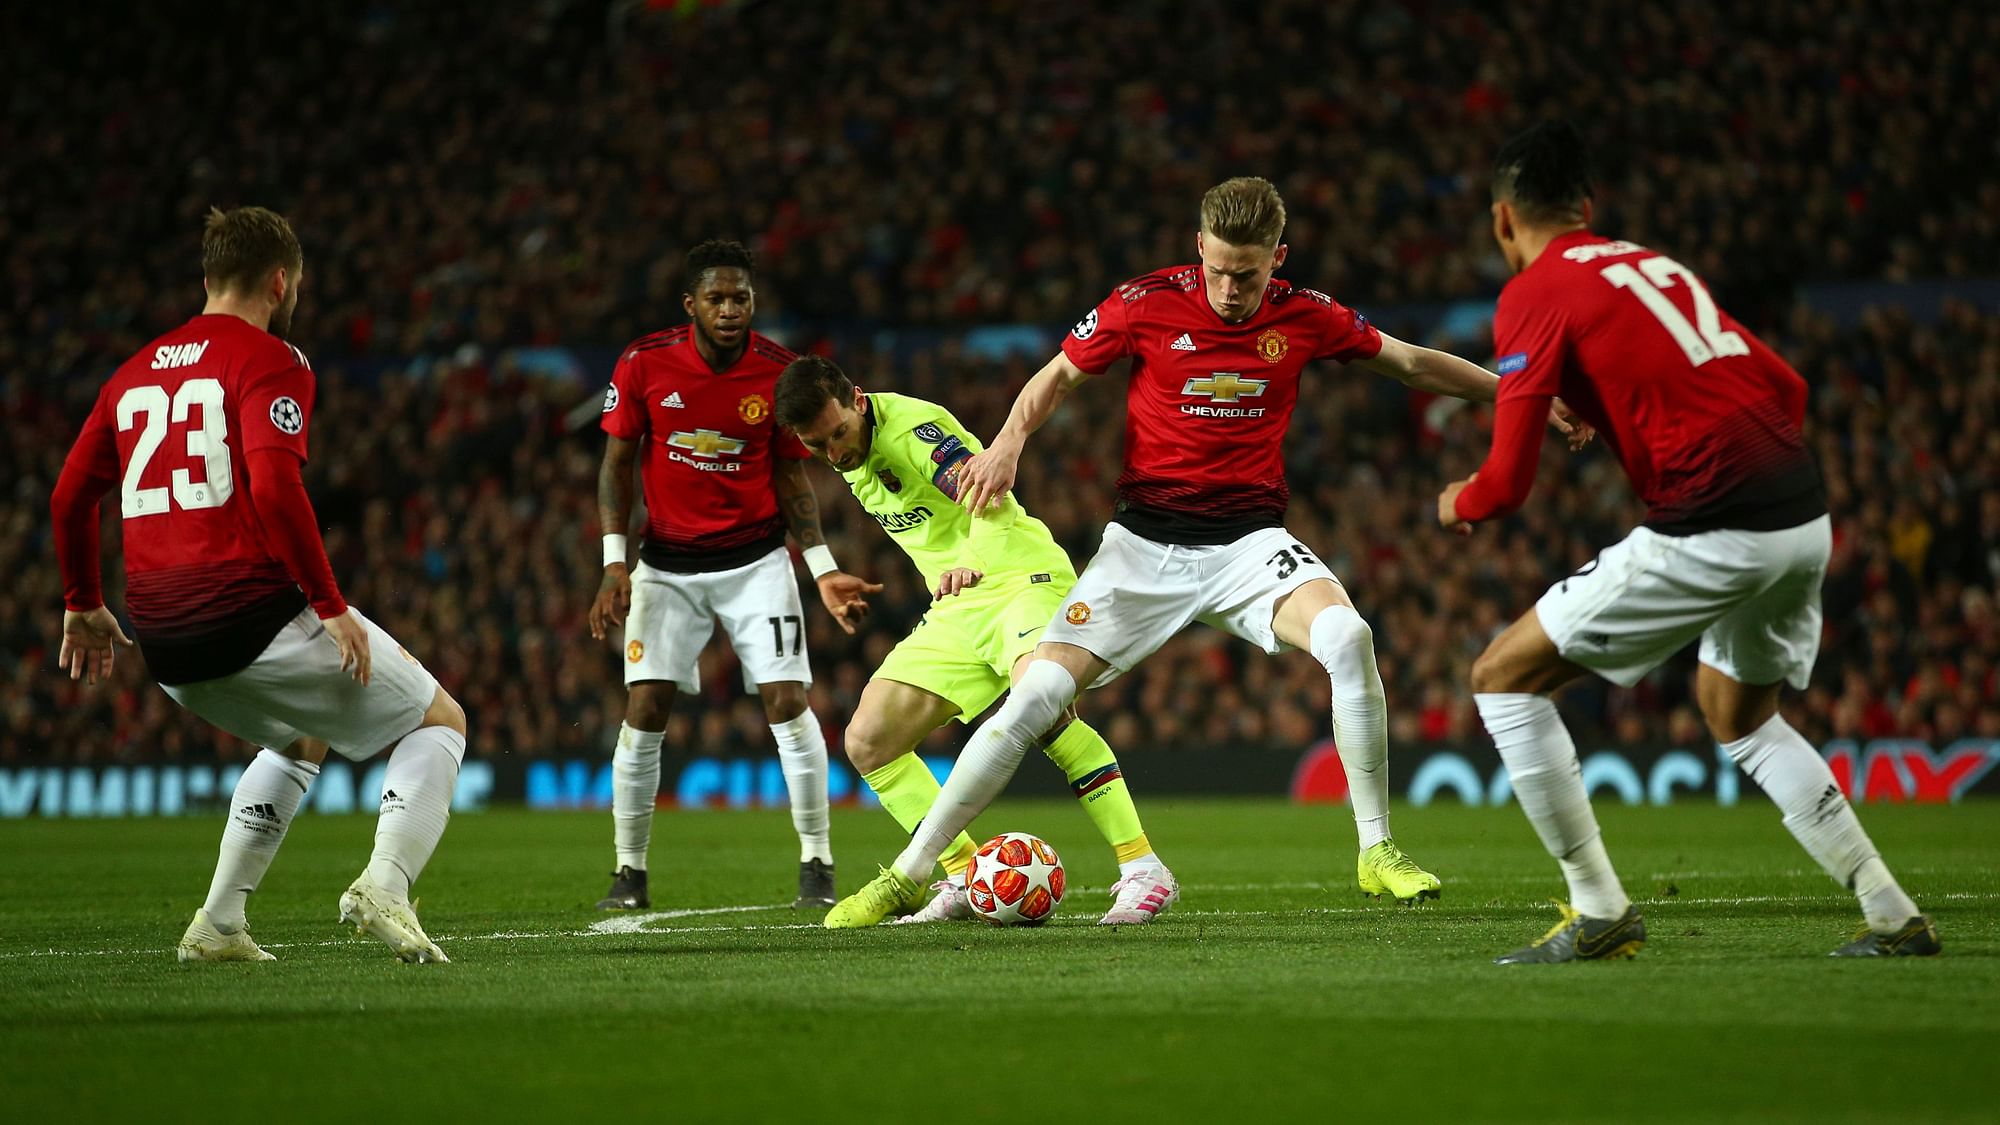 Barcelona’s Lionel Messi, center, vies for the ball with Manchester United’s Scott McTominay.